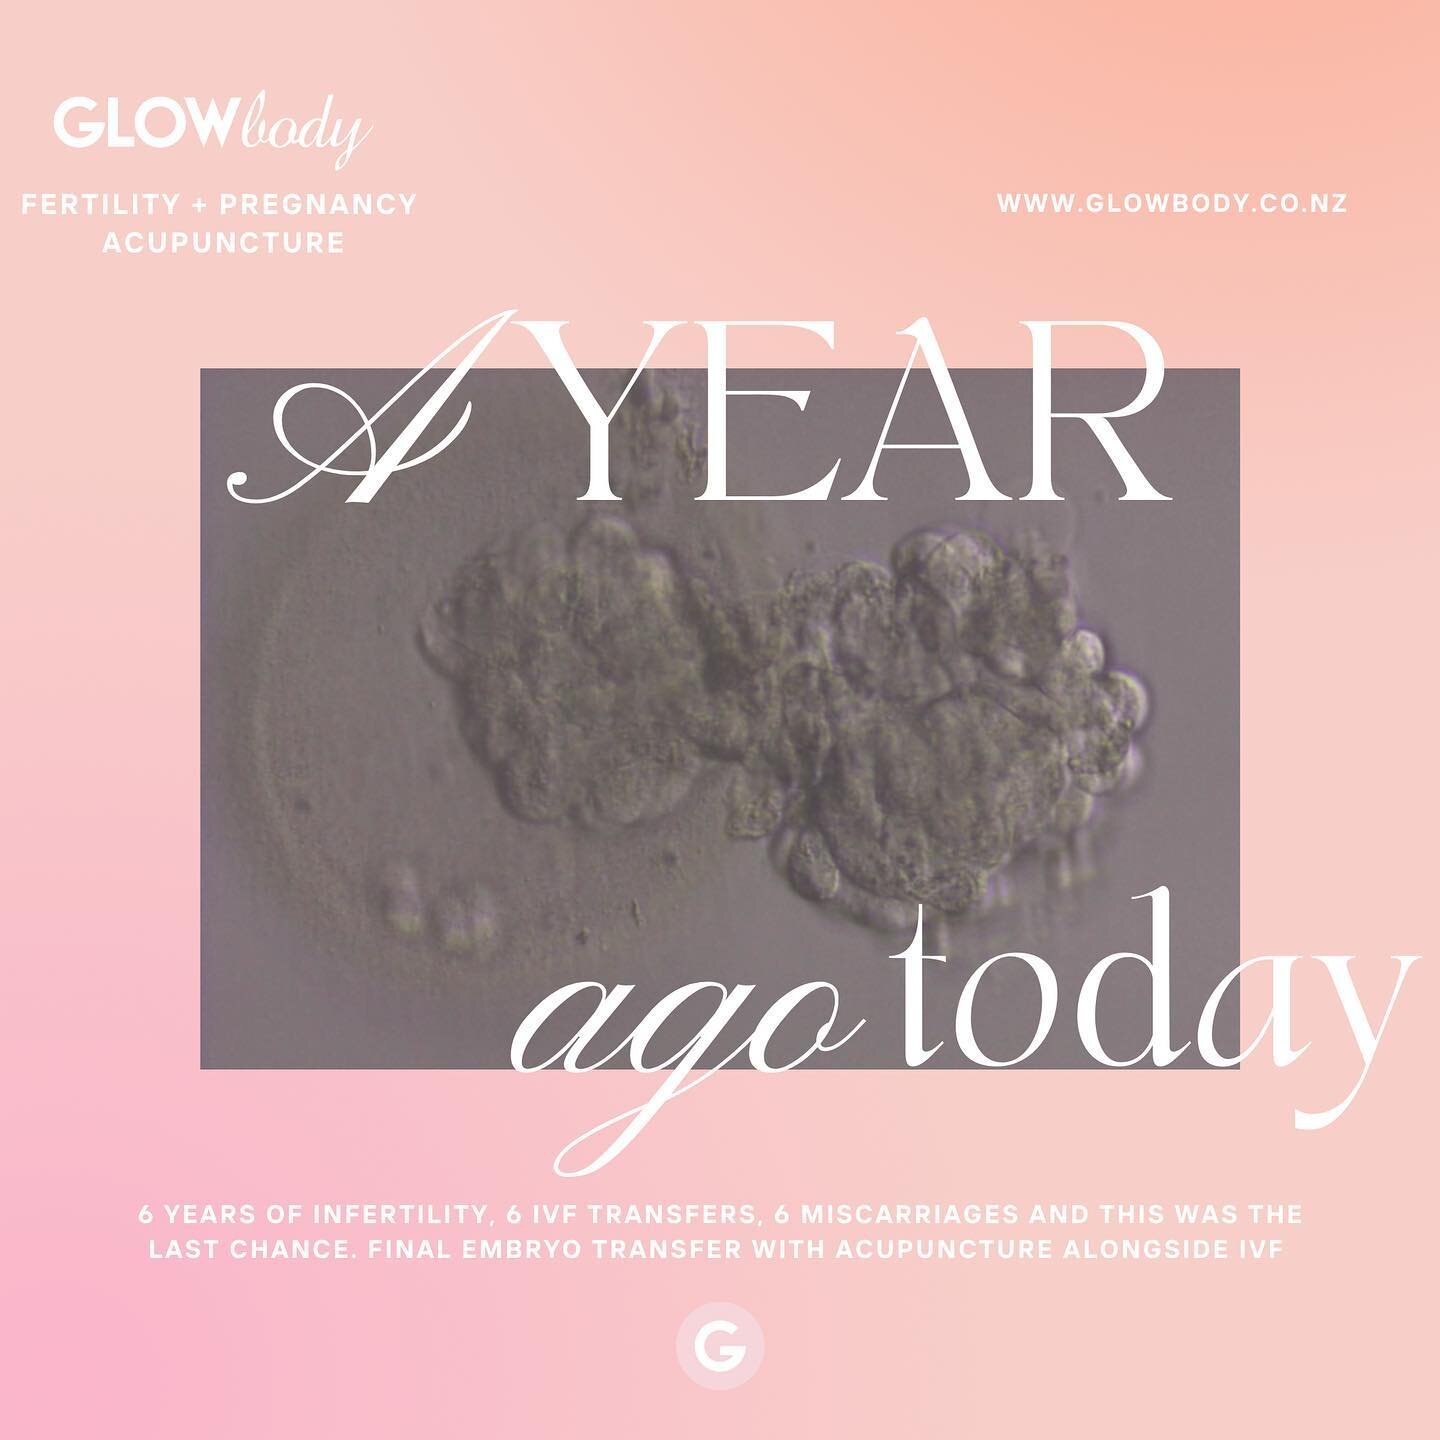 I came to GLOWbody prior to my final embryo transfer. After battling infertility for 6 years, 6 rounds of IVF and 6 miscarriages this was my last chance..

#fertility #infertility #ivf #ivfjourney #iui #miscarriage #rainbowbaby #ivfbaby #pregnancy #a